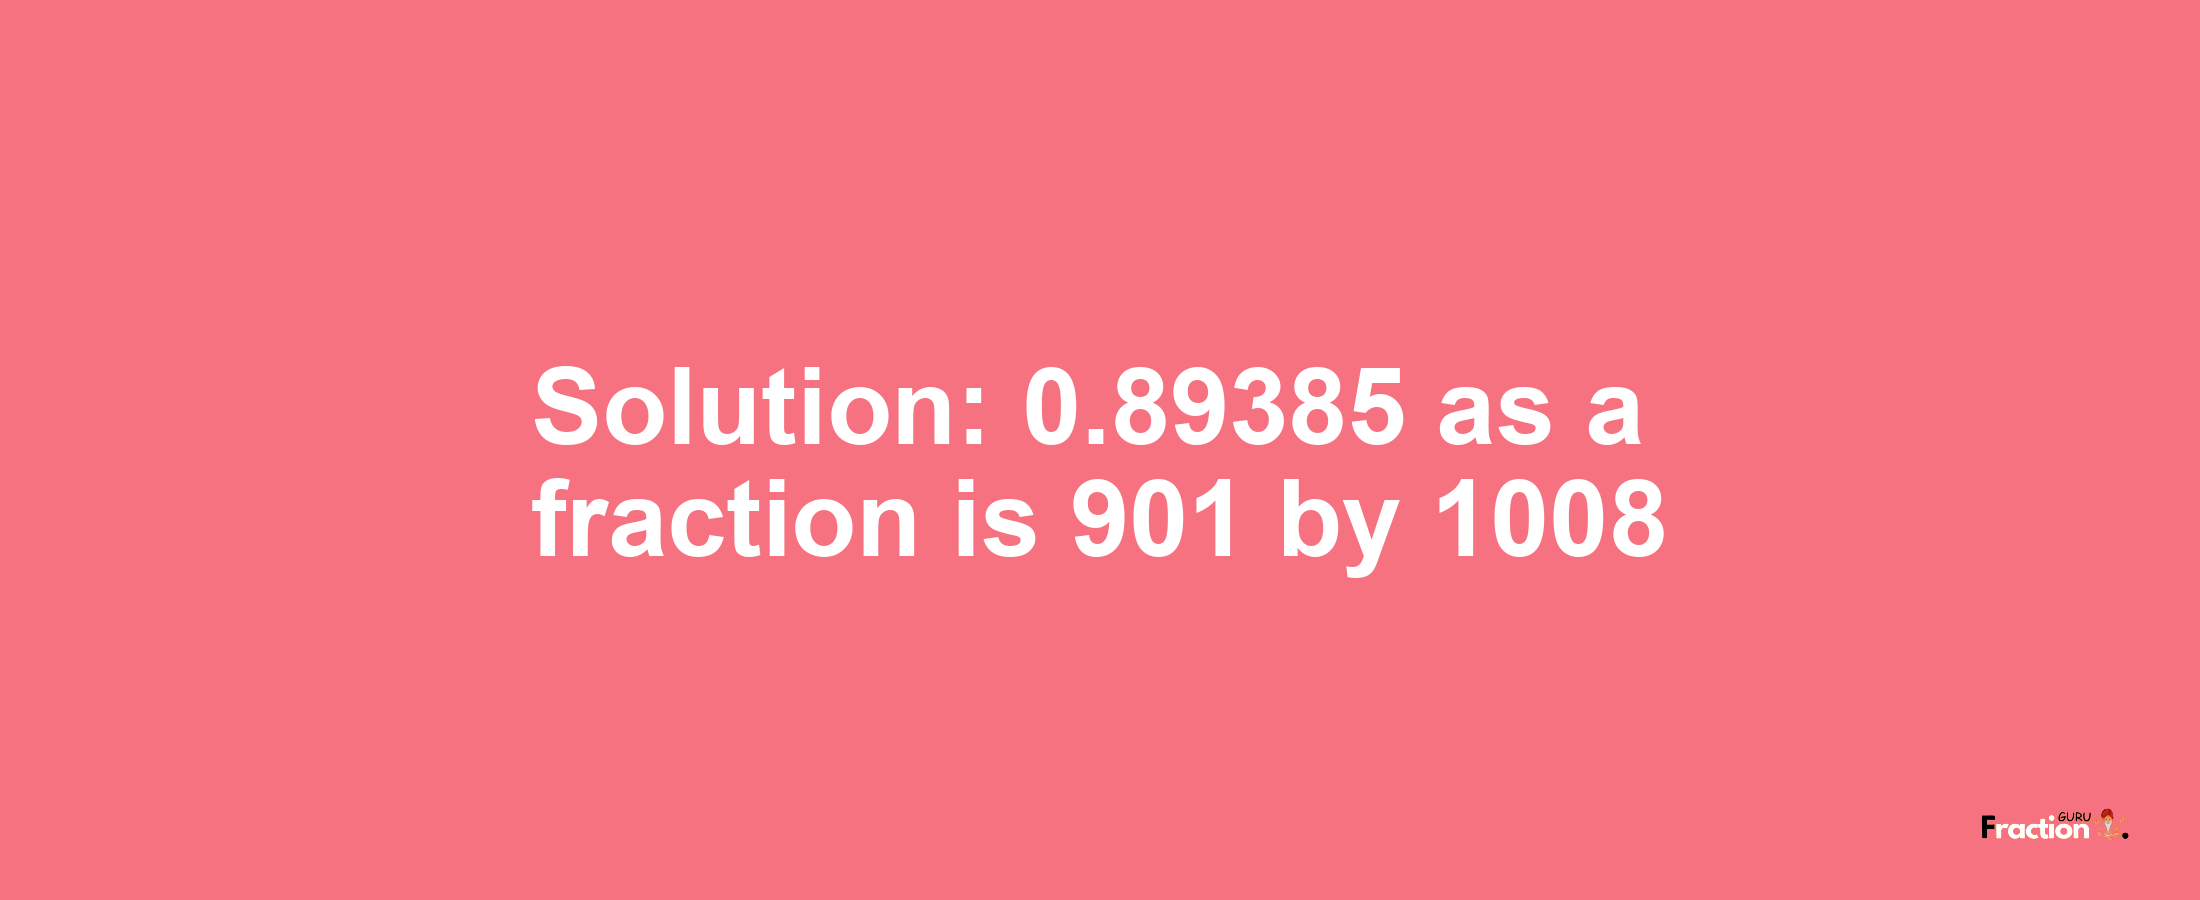 Solution:0.89385 as a fraction is 901/1008